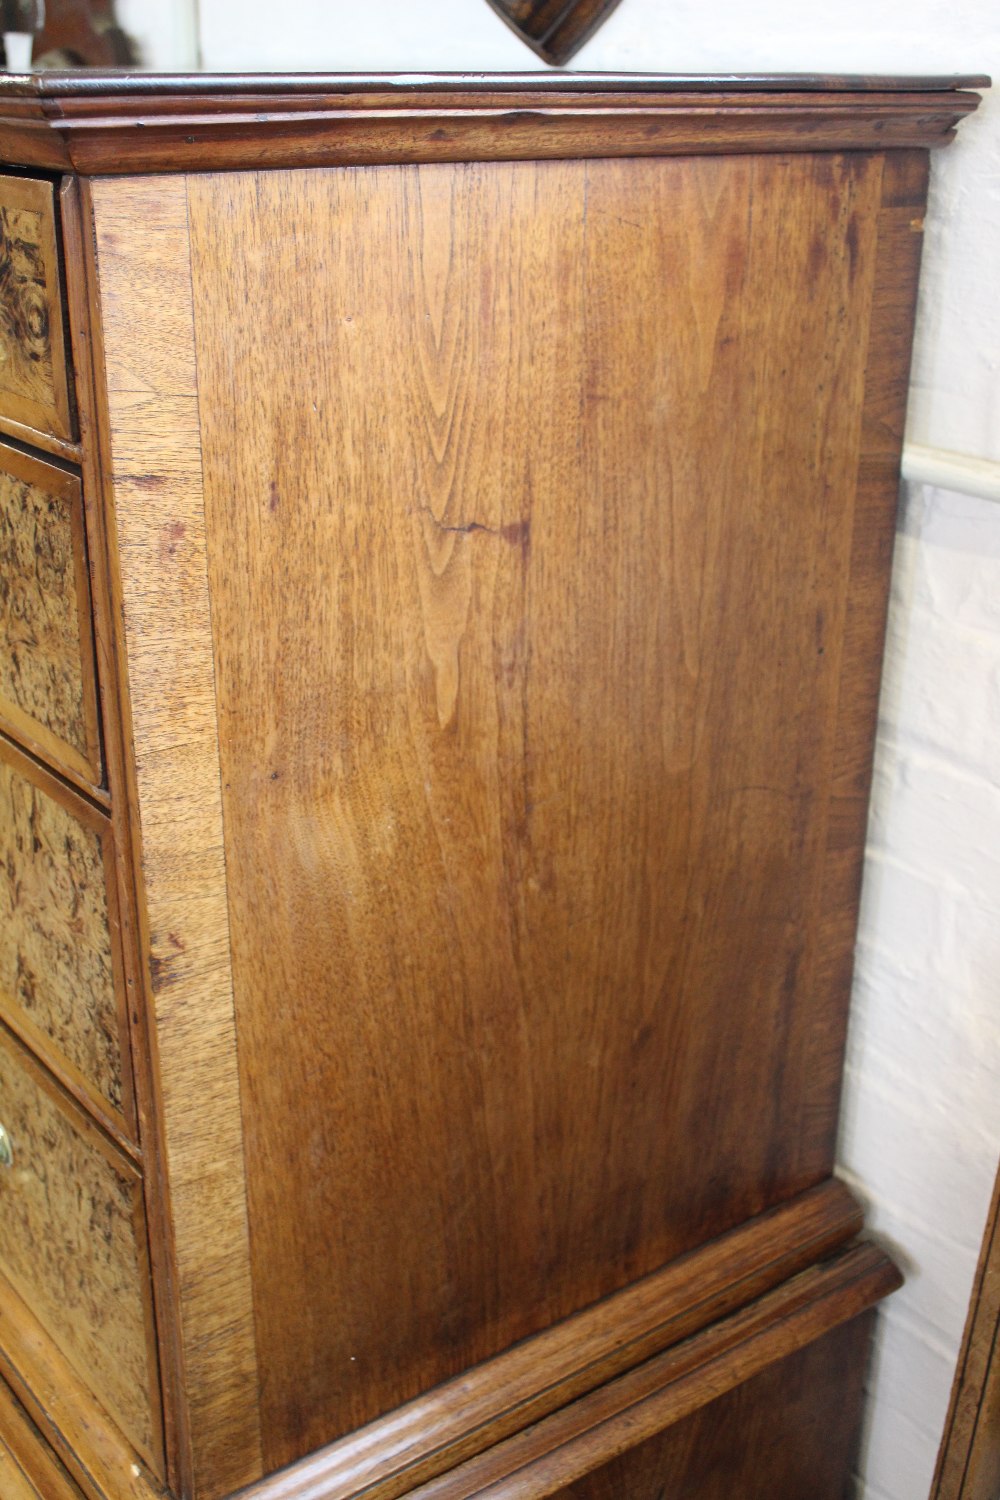 An 18th century style walnut and burr walnut chest on stand, incorporating some earlier timbers, - Image 7 of 16